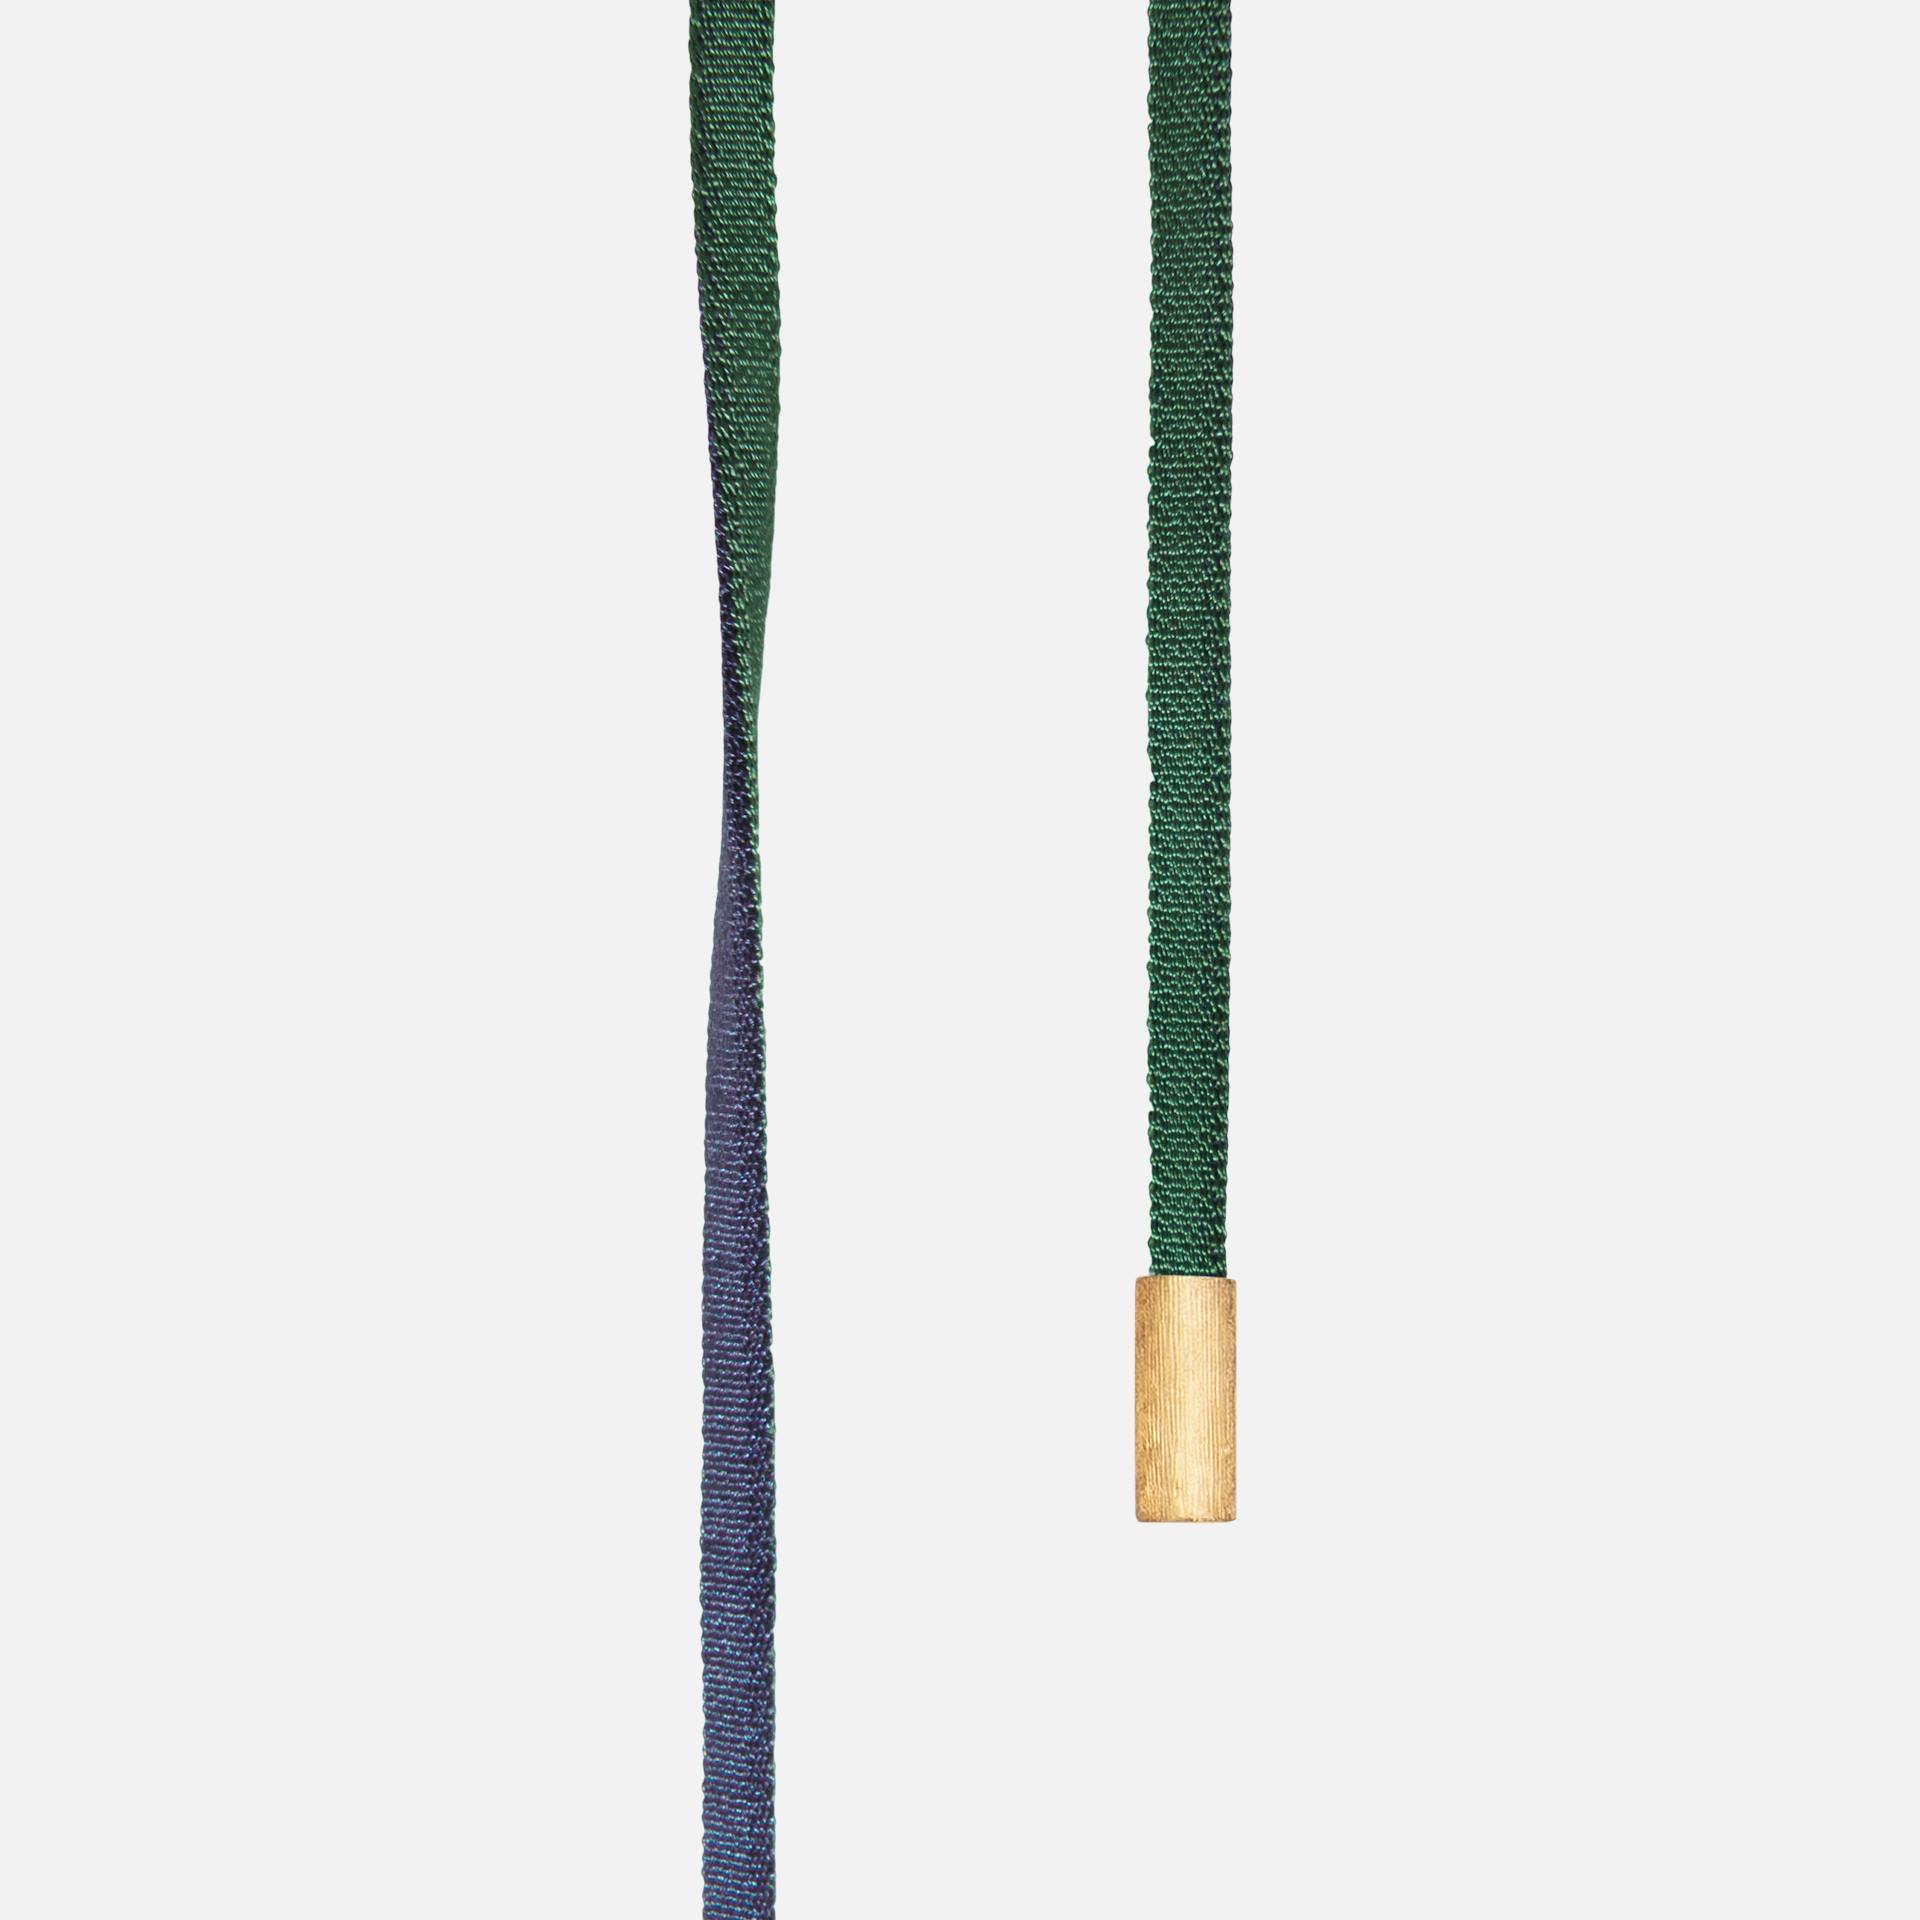 Necklace string Blue/green Design string with end pieces in 18k gold